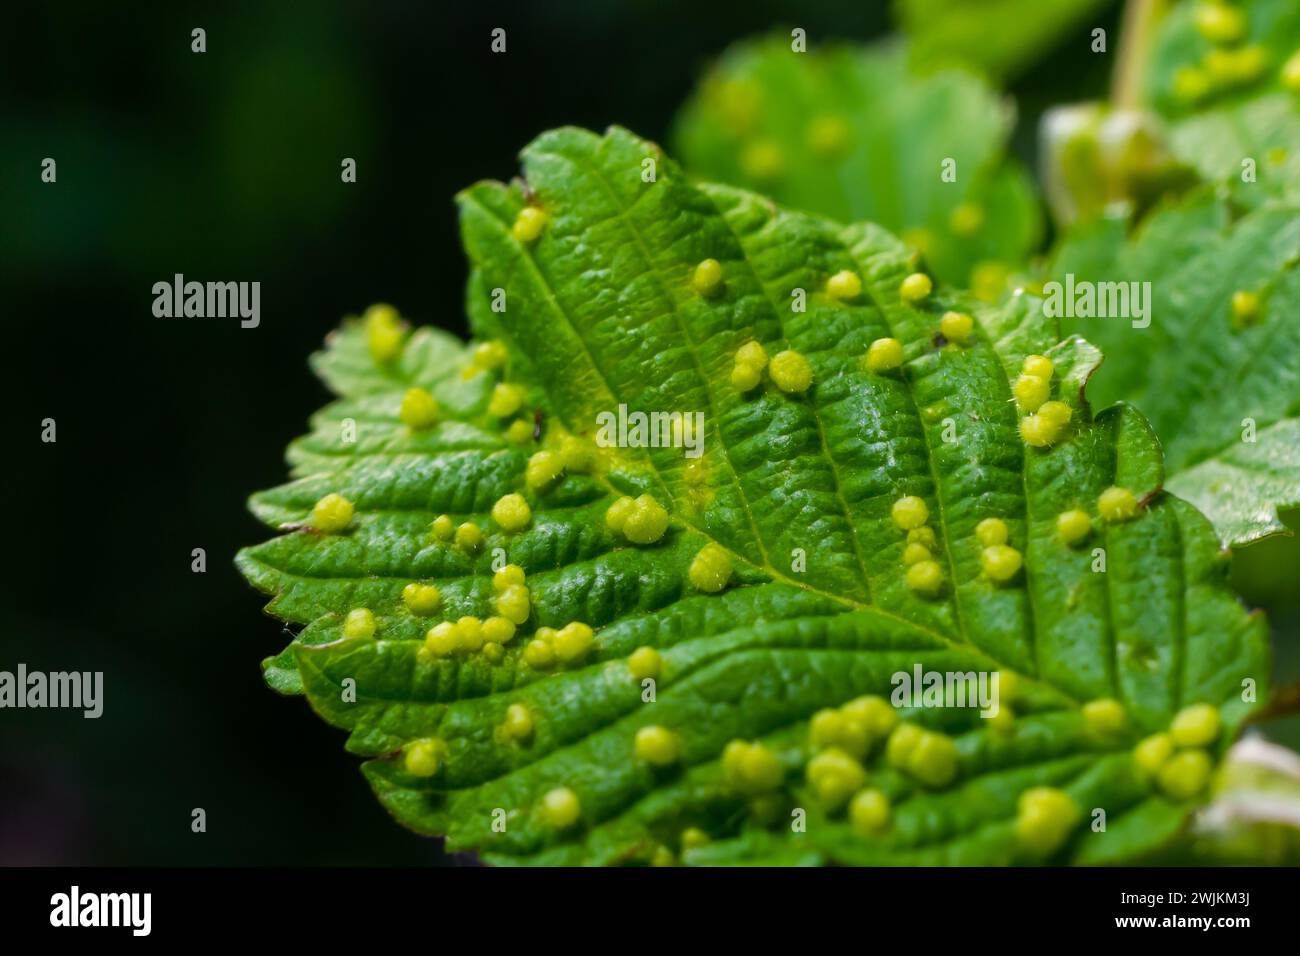 Leaves with gall mite Eriophyes tiliae. A close-up photograph of a leaf affected by galls of Eriophyes tiliae. High quality photo Stock Photo